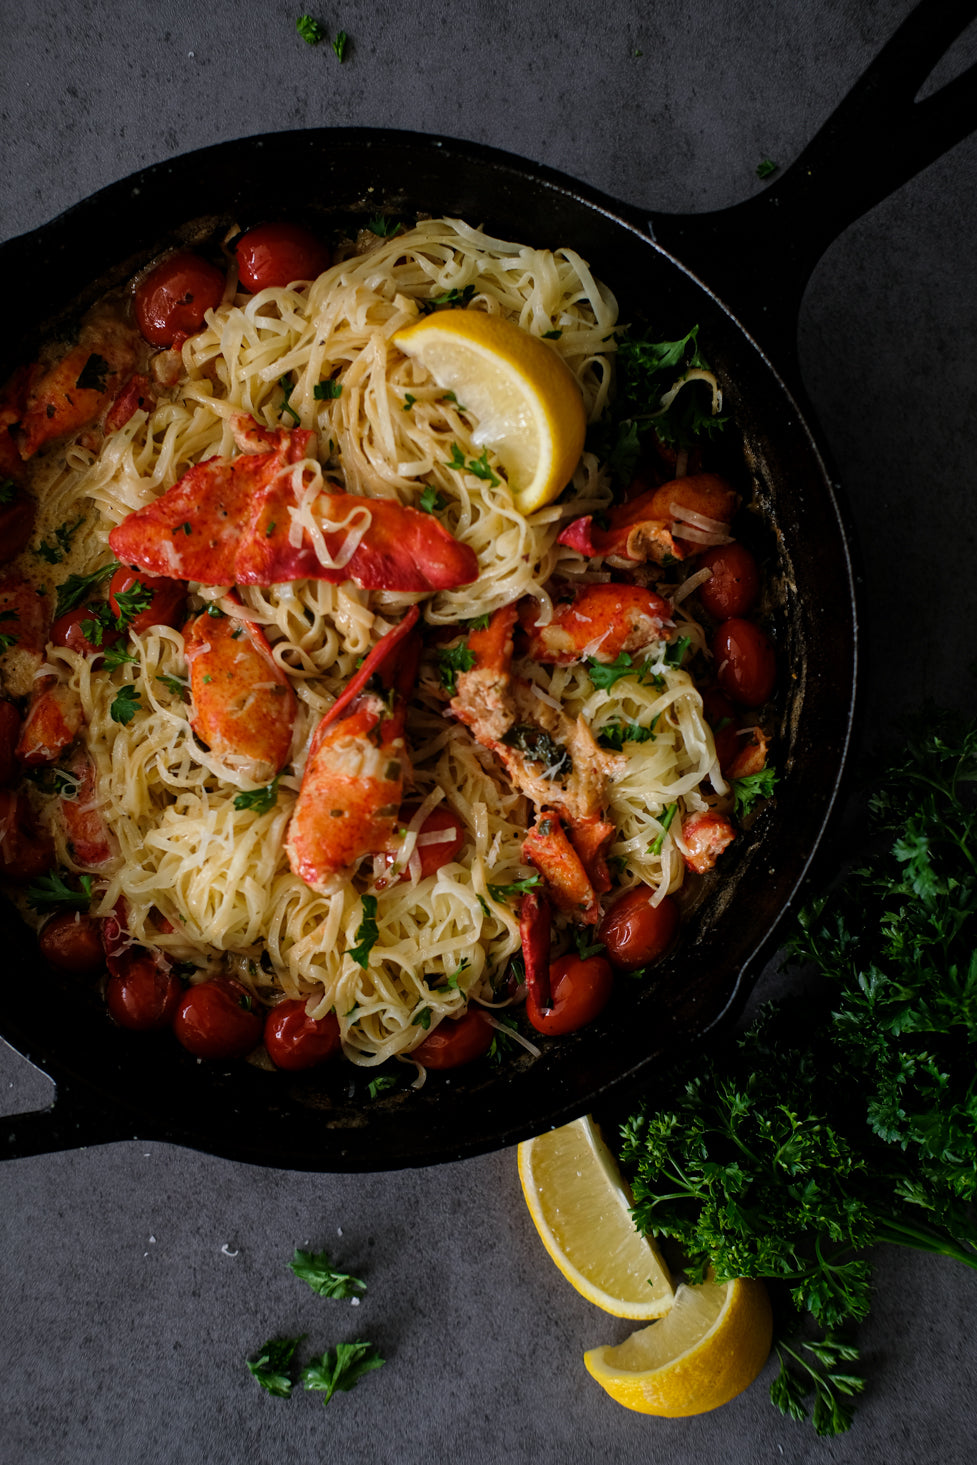 Spicy Lobster Pasta with Blistered Tomatoes